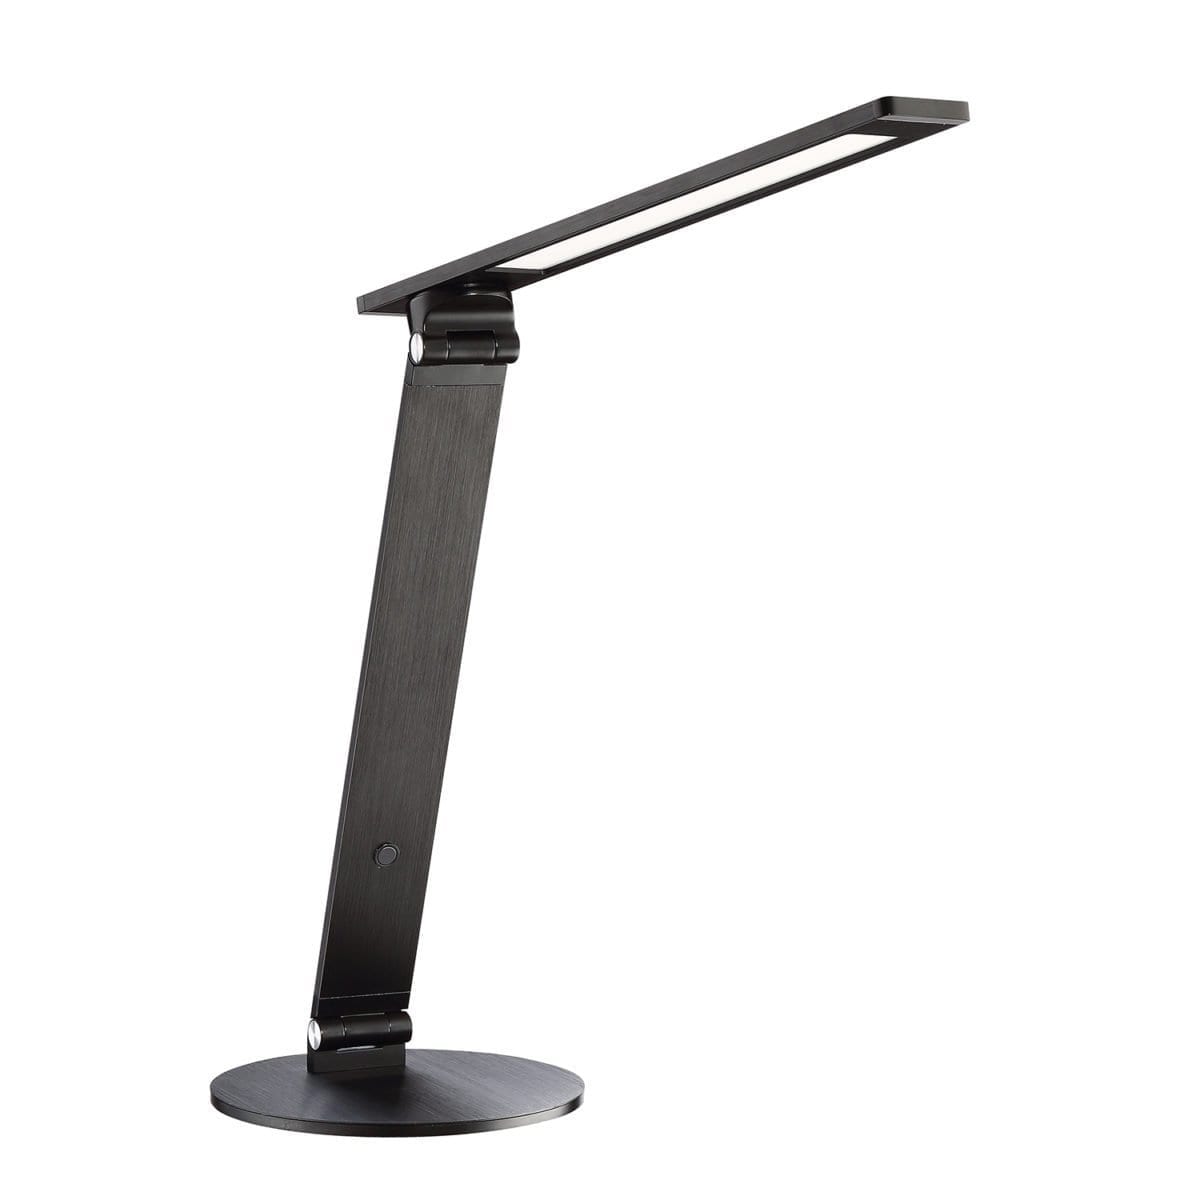 148 PTL 5002 BLK
LED Table Lamp available in
Black, Brushed Aluminum, or
Russet Bronze
Regular Price $345.99
Sale Price $242.99